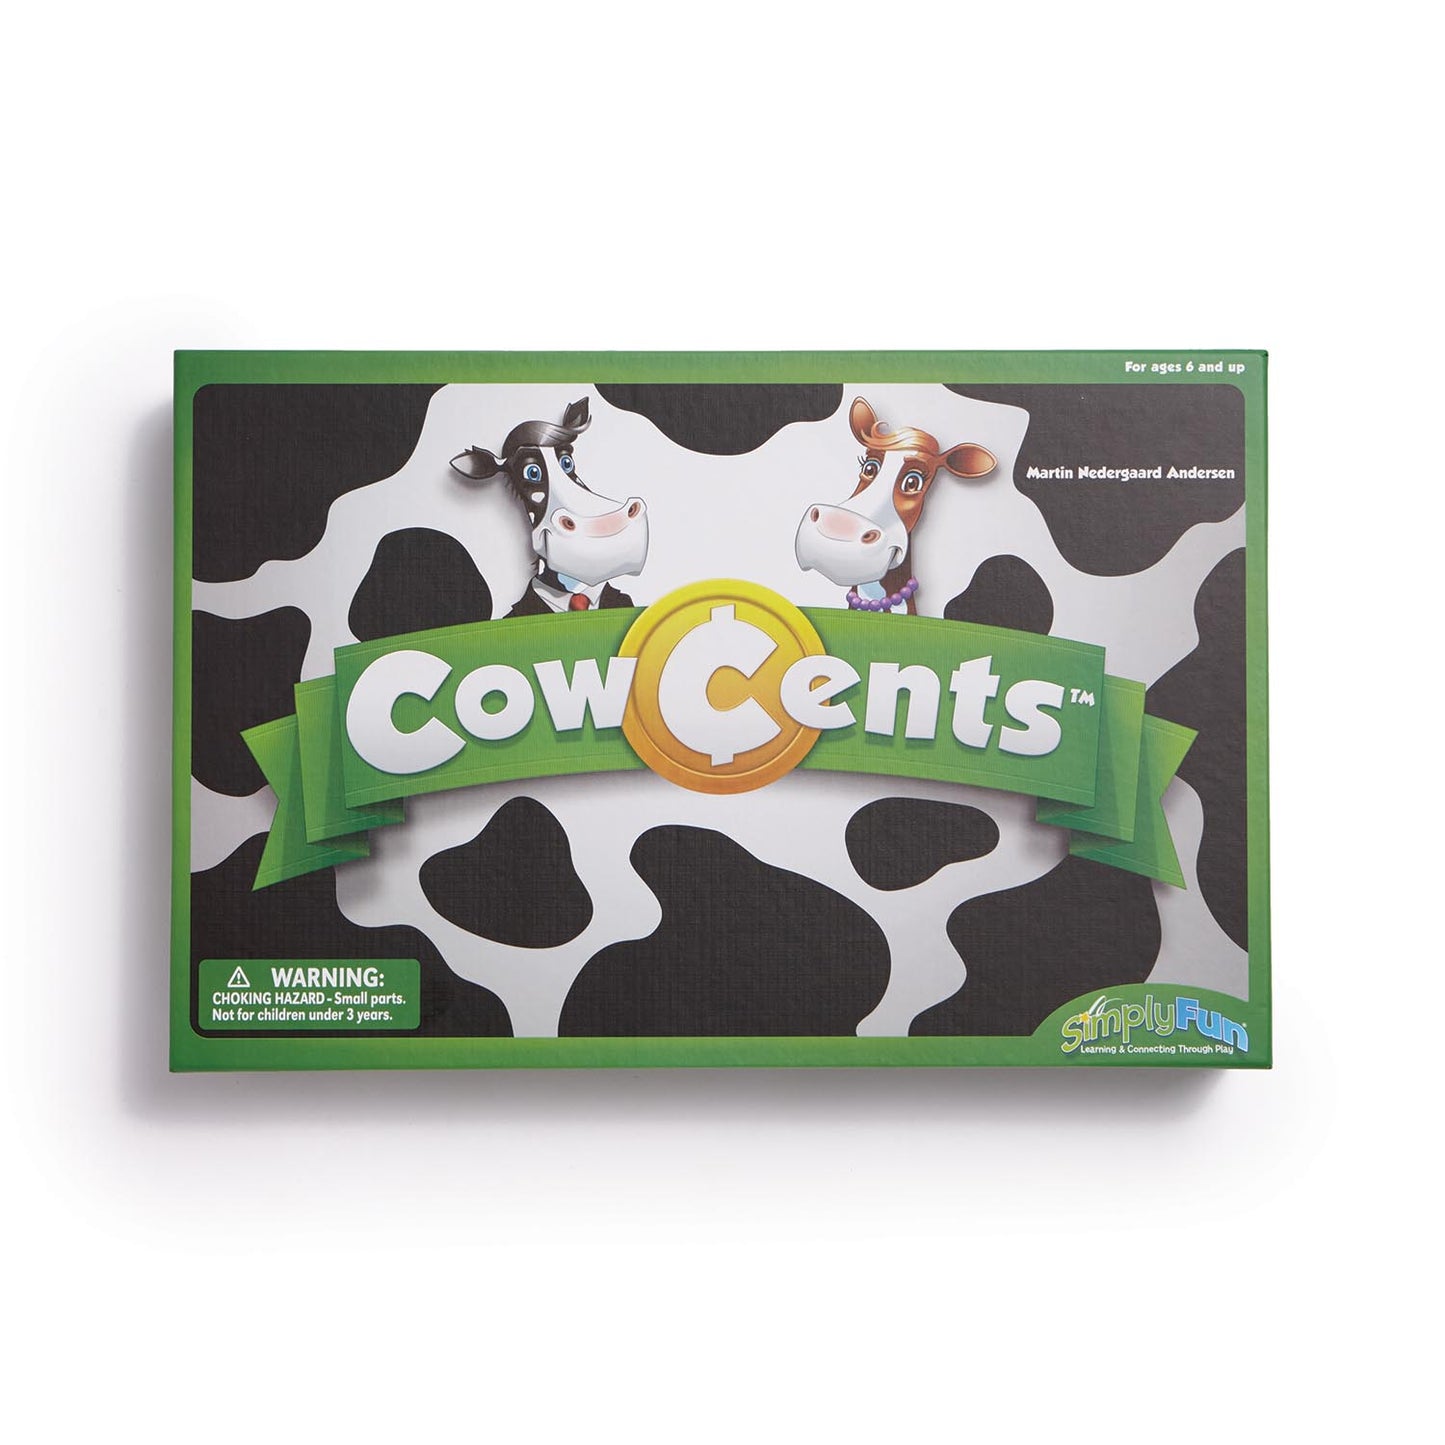 Cow Cents by SimplyFun is a fun money game and math game for ages 6 and up